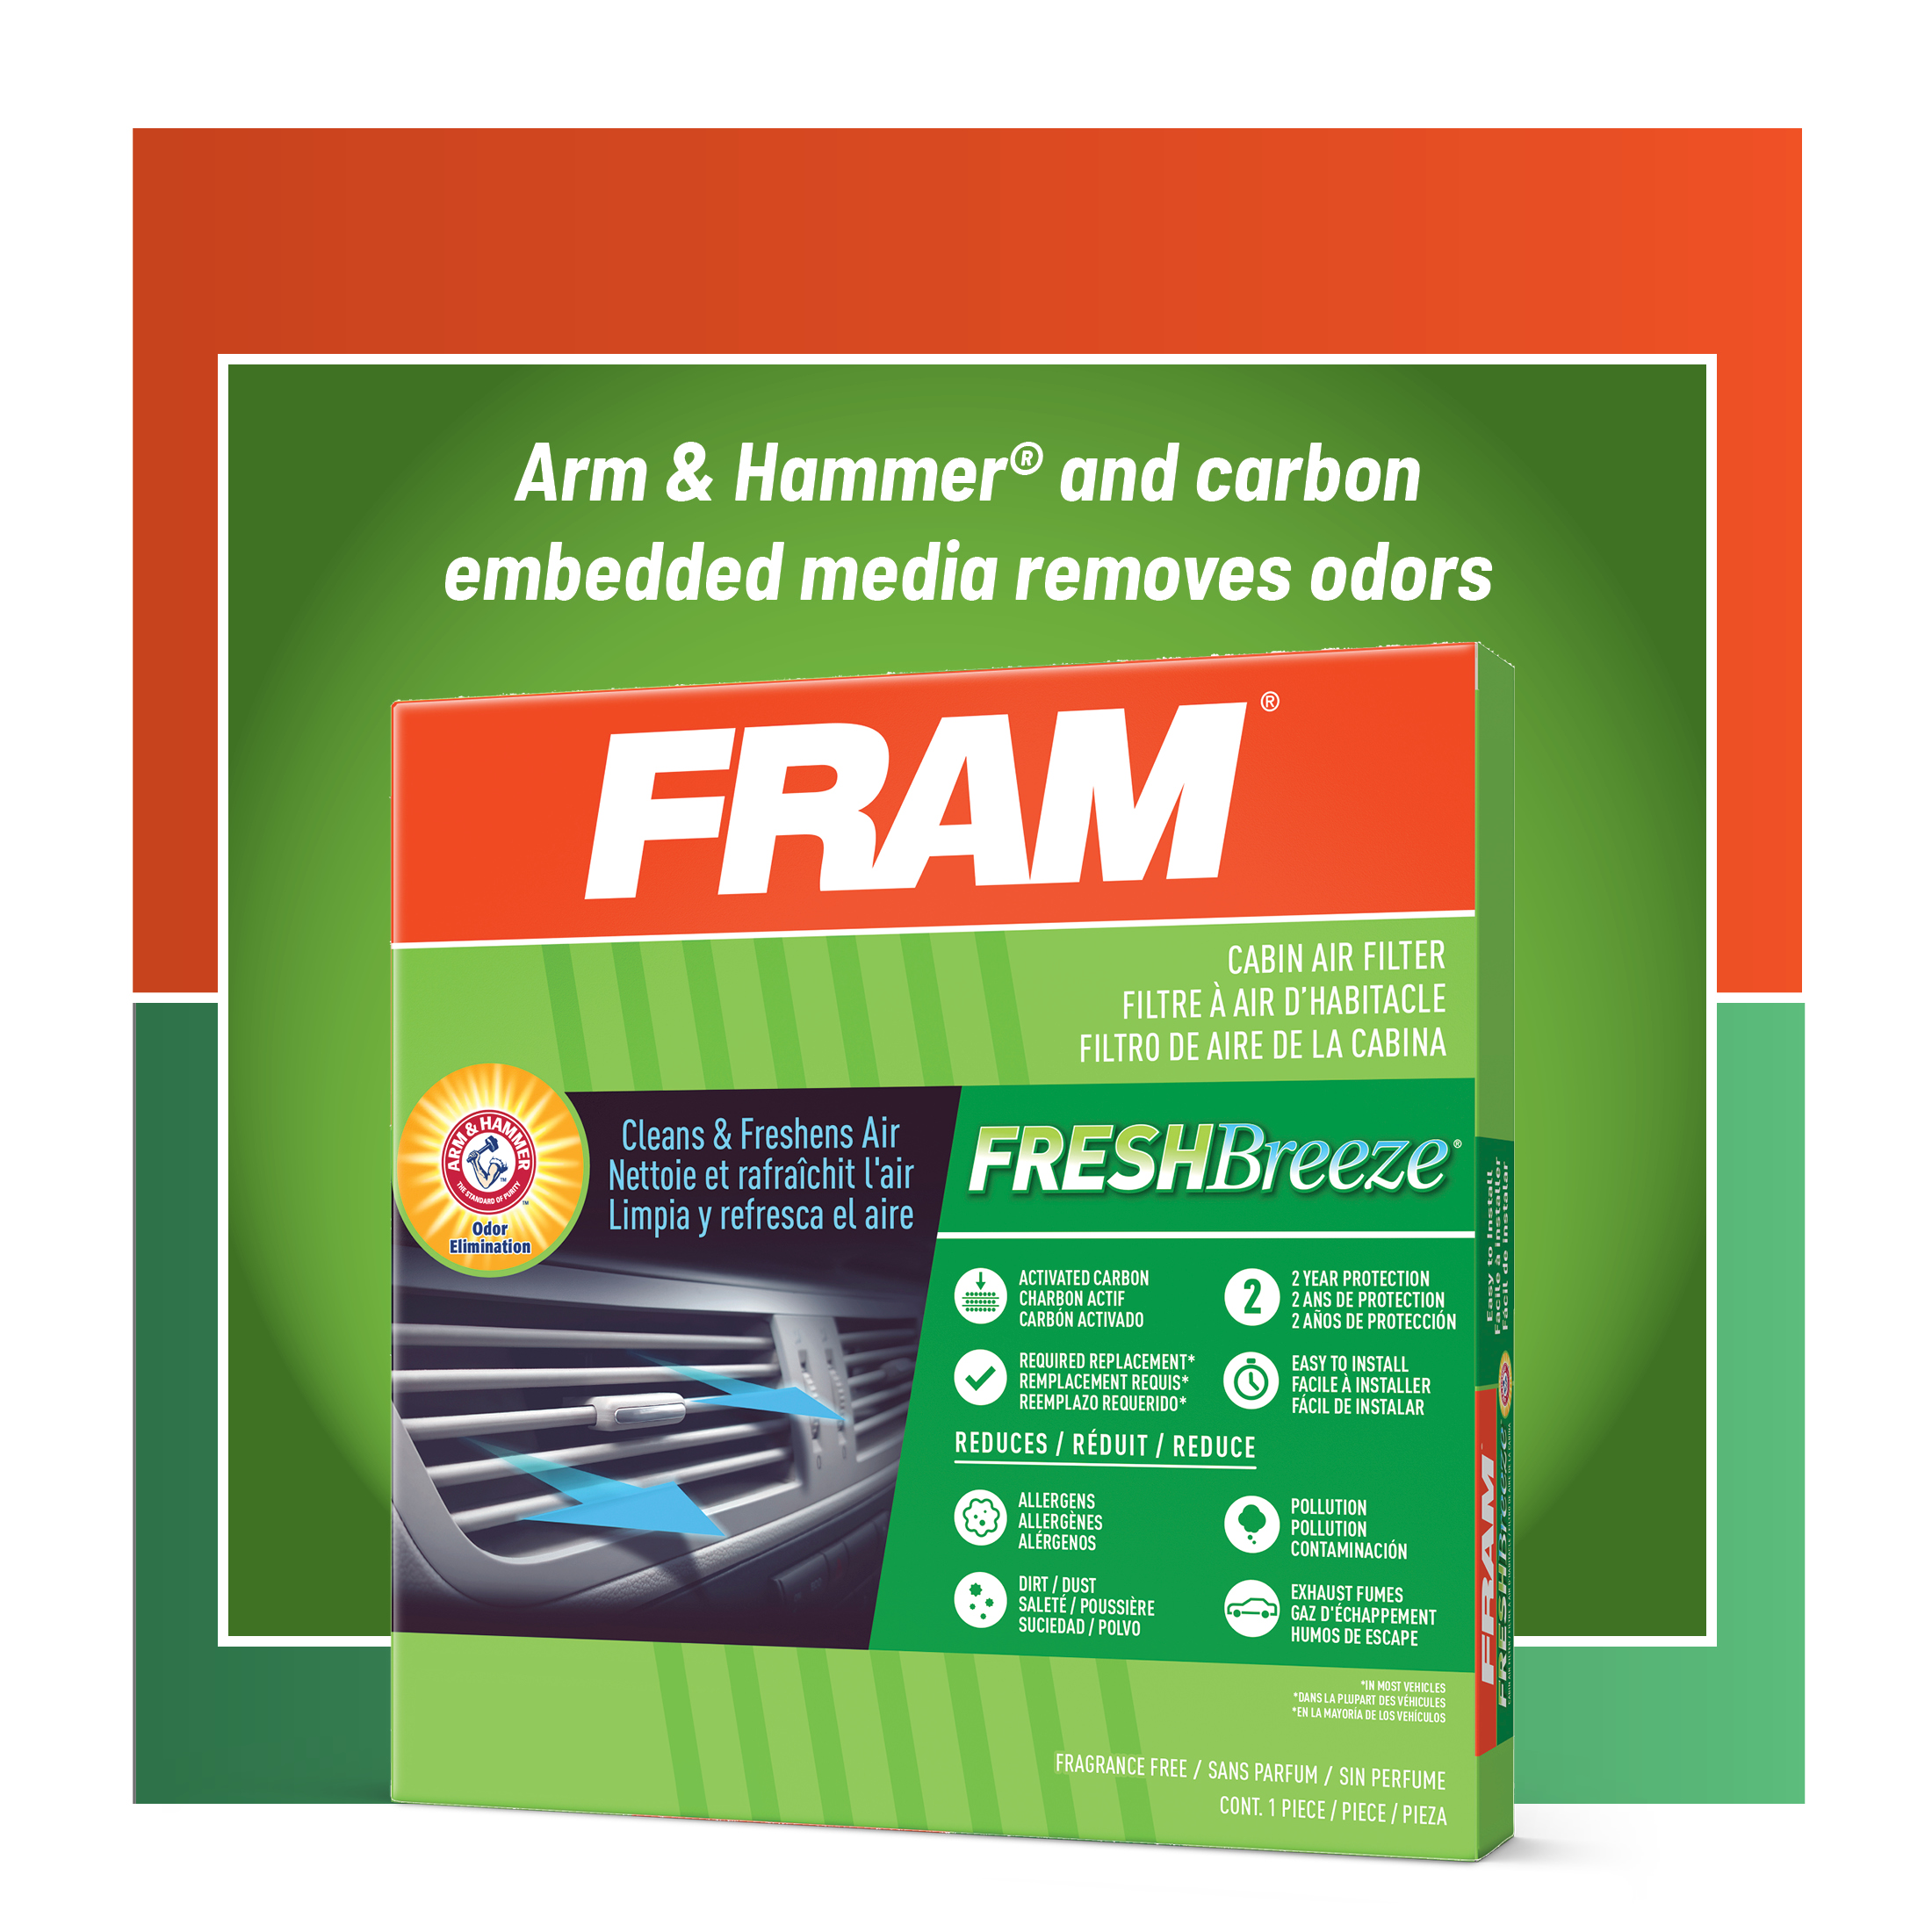 FRAM Fresh Breeze Cabin Air Filter CF10744 with Arm & Hammer Baking Soda, for Select Mitsubishi Vehicles Fits select: 1999-2003 MITSUBISHI GALANT, 2000-2005 MITSUBISHI ECLIPSE - image 1 of 10